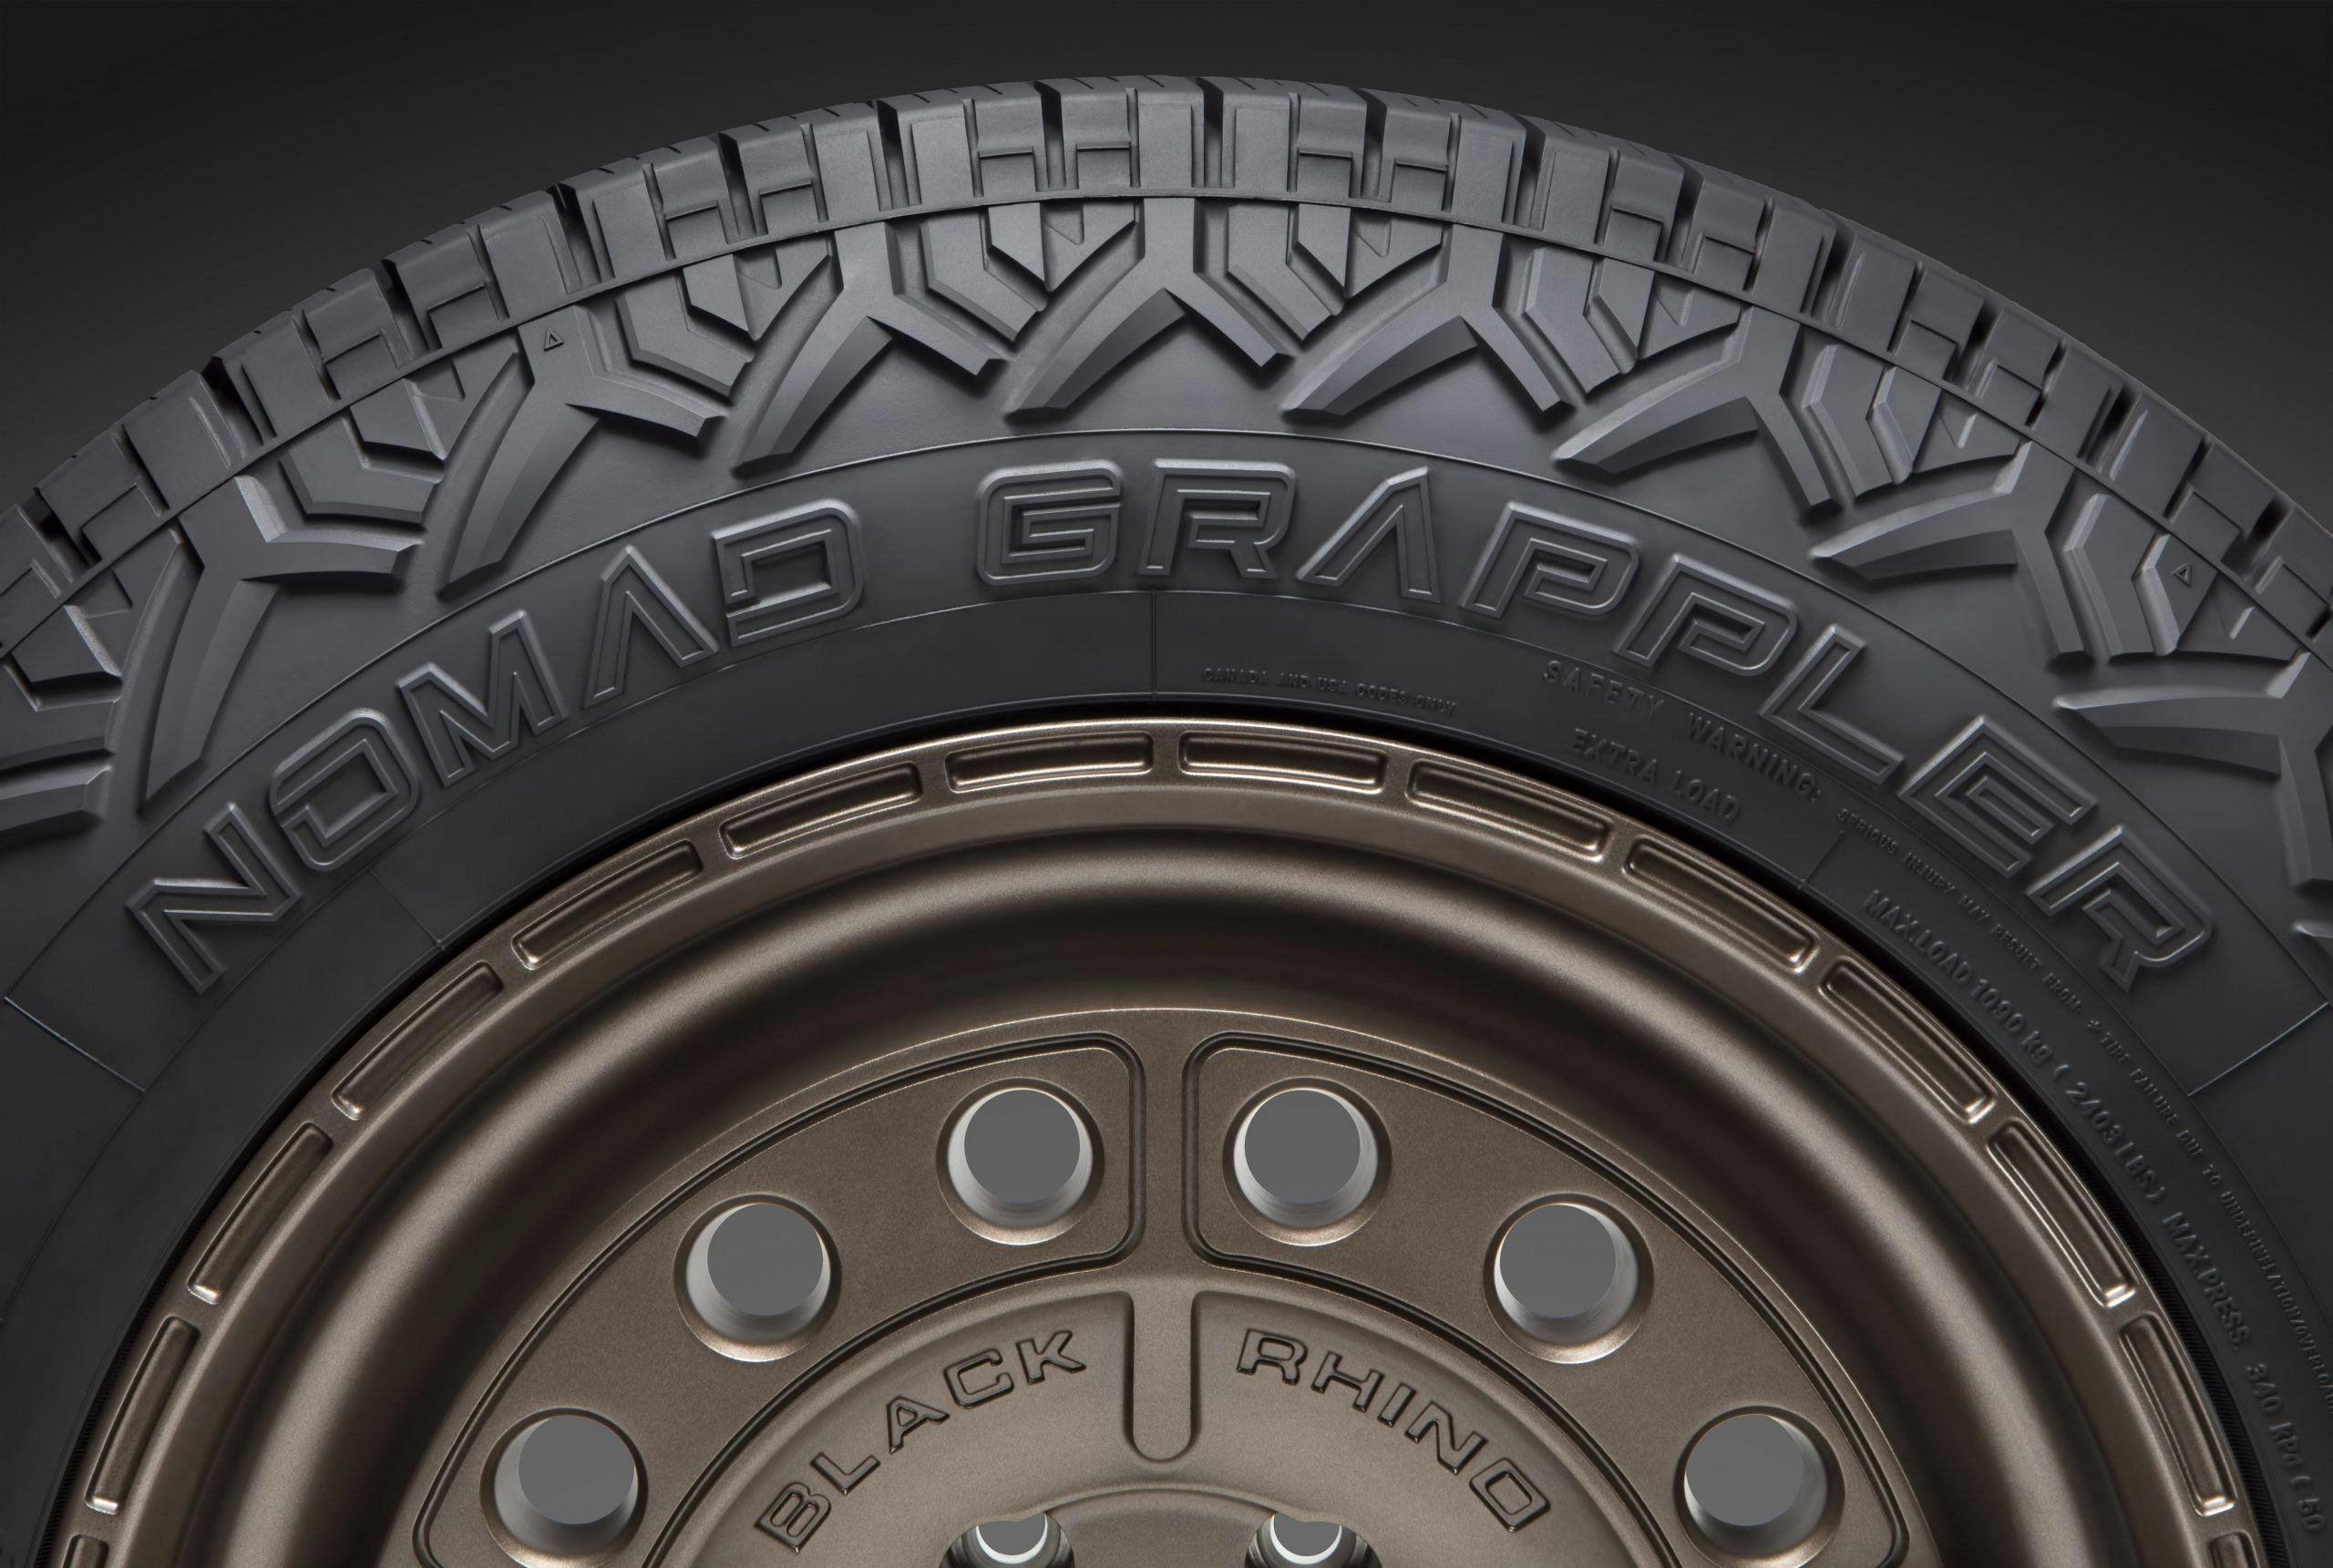 Nitto Tires Nomad Grappler tire badging closeup